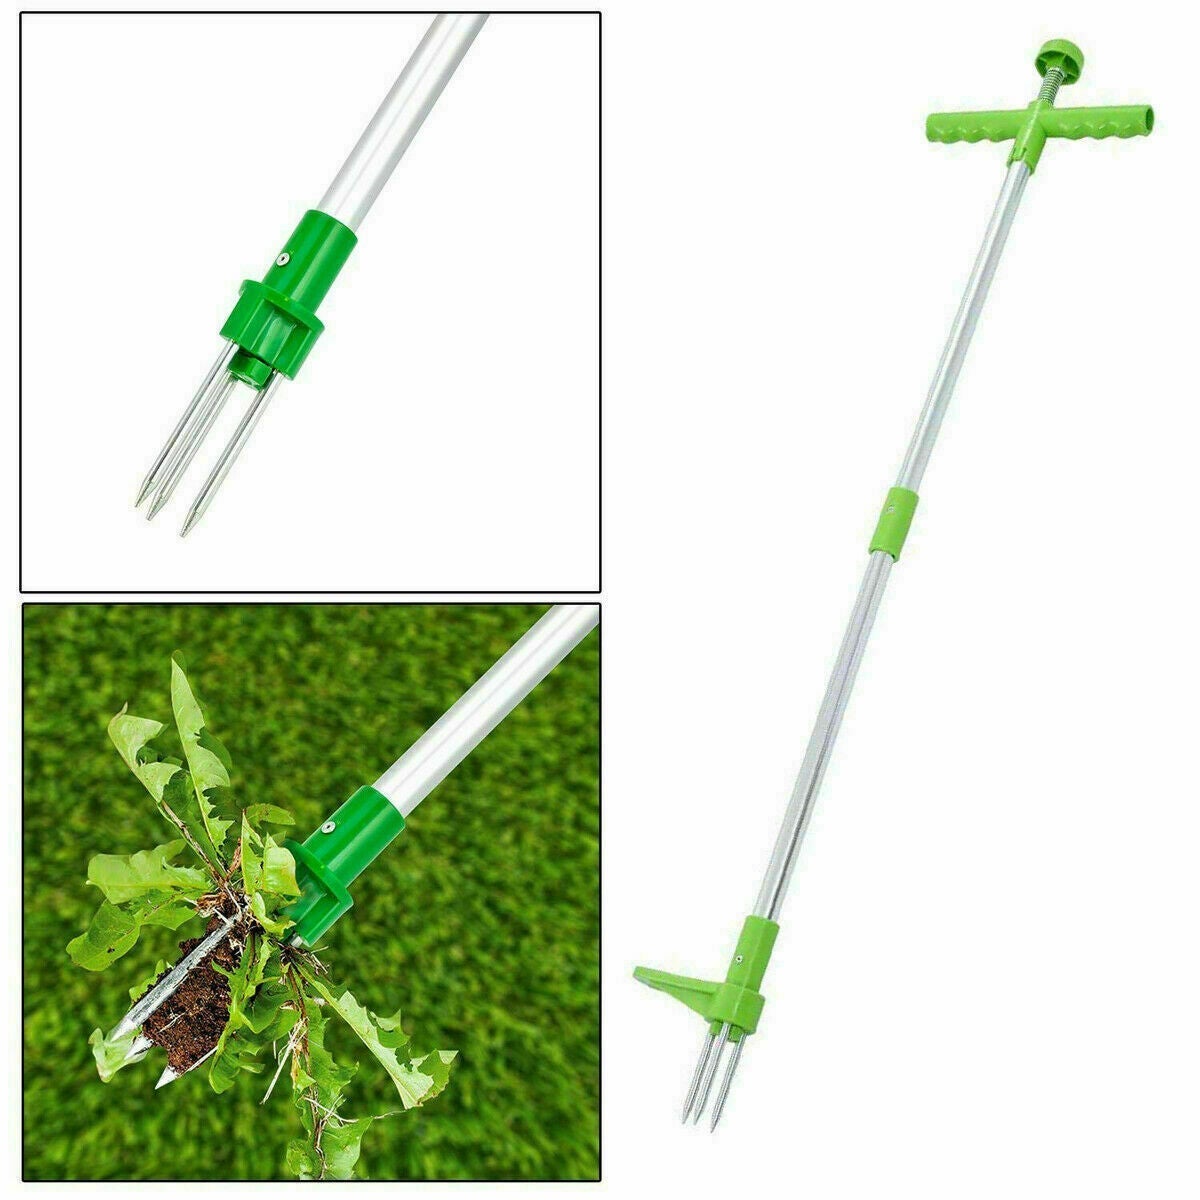 Ozoffer Root Killer Remover Tool Weed Puller Weeder Twister Twist Pull Garden Lawn AU